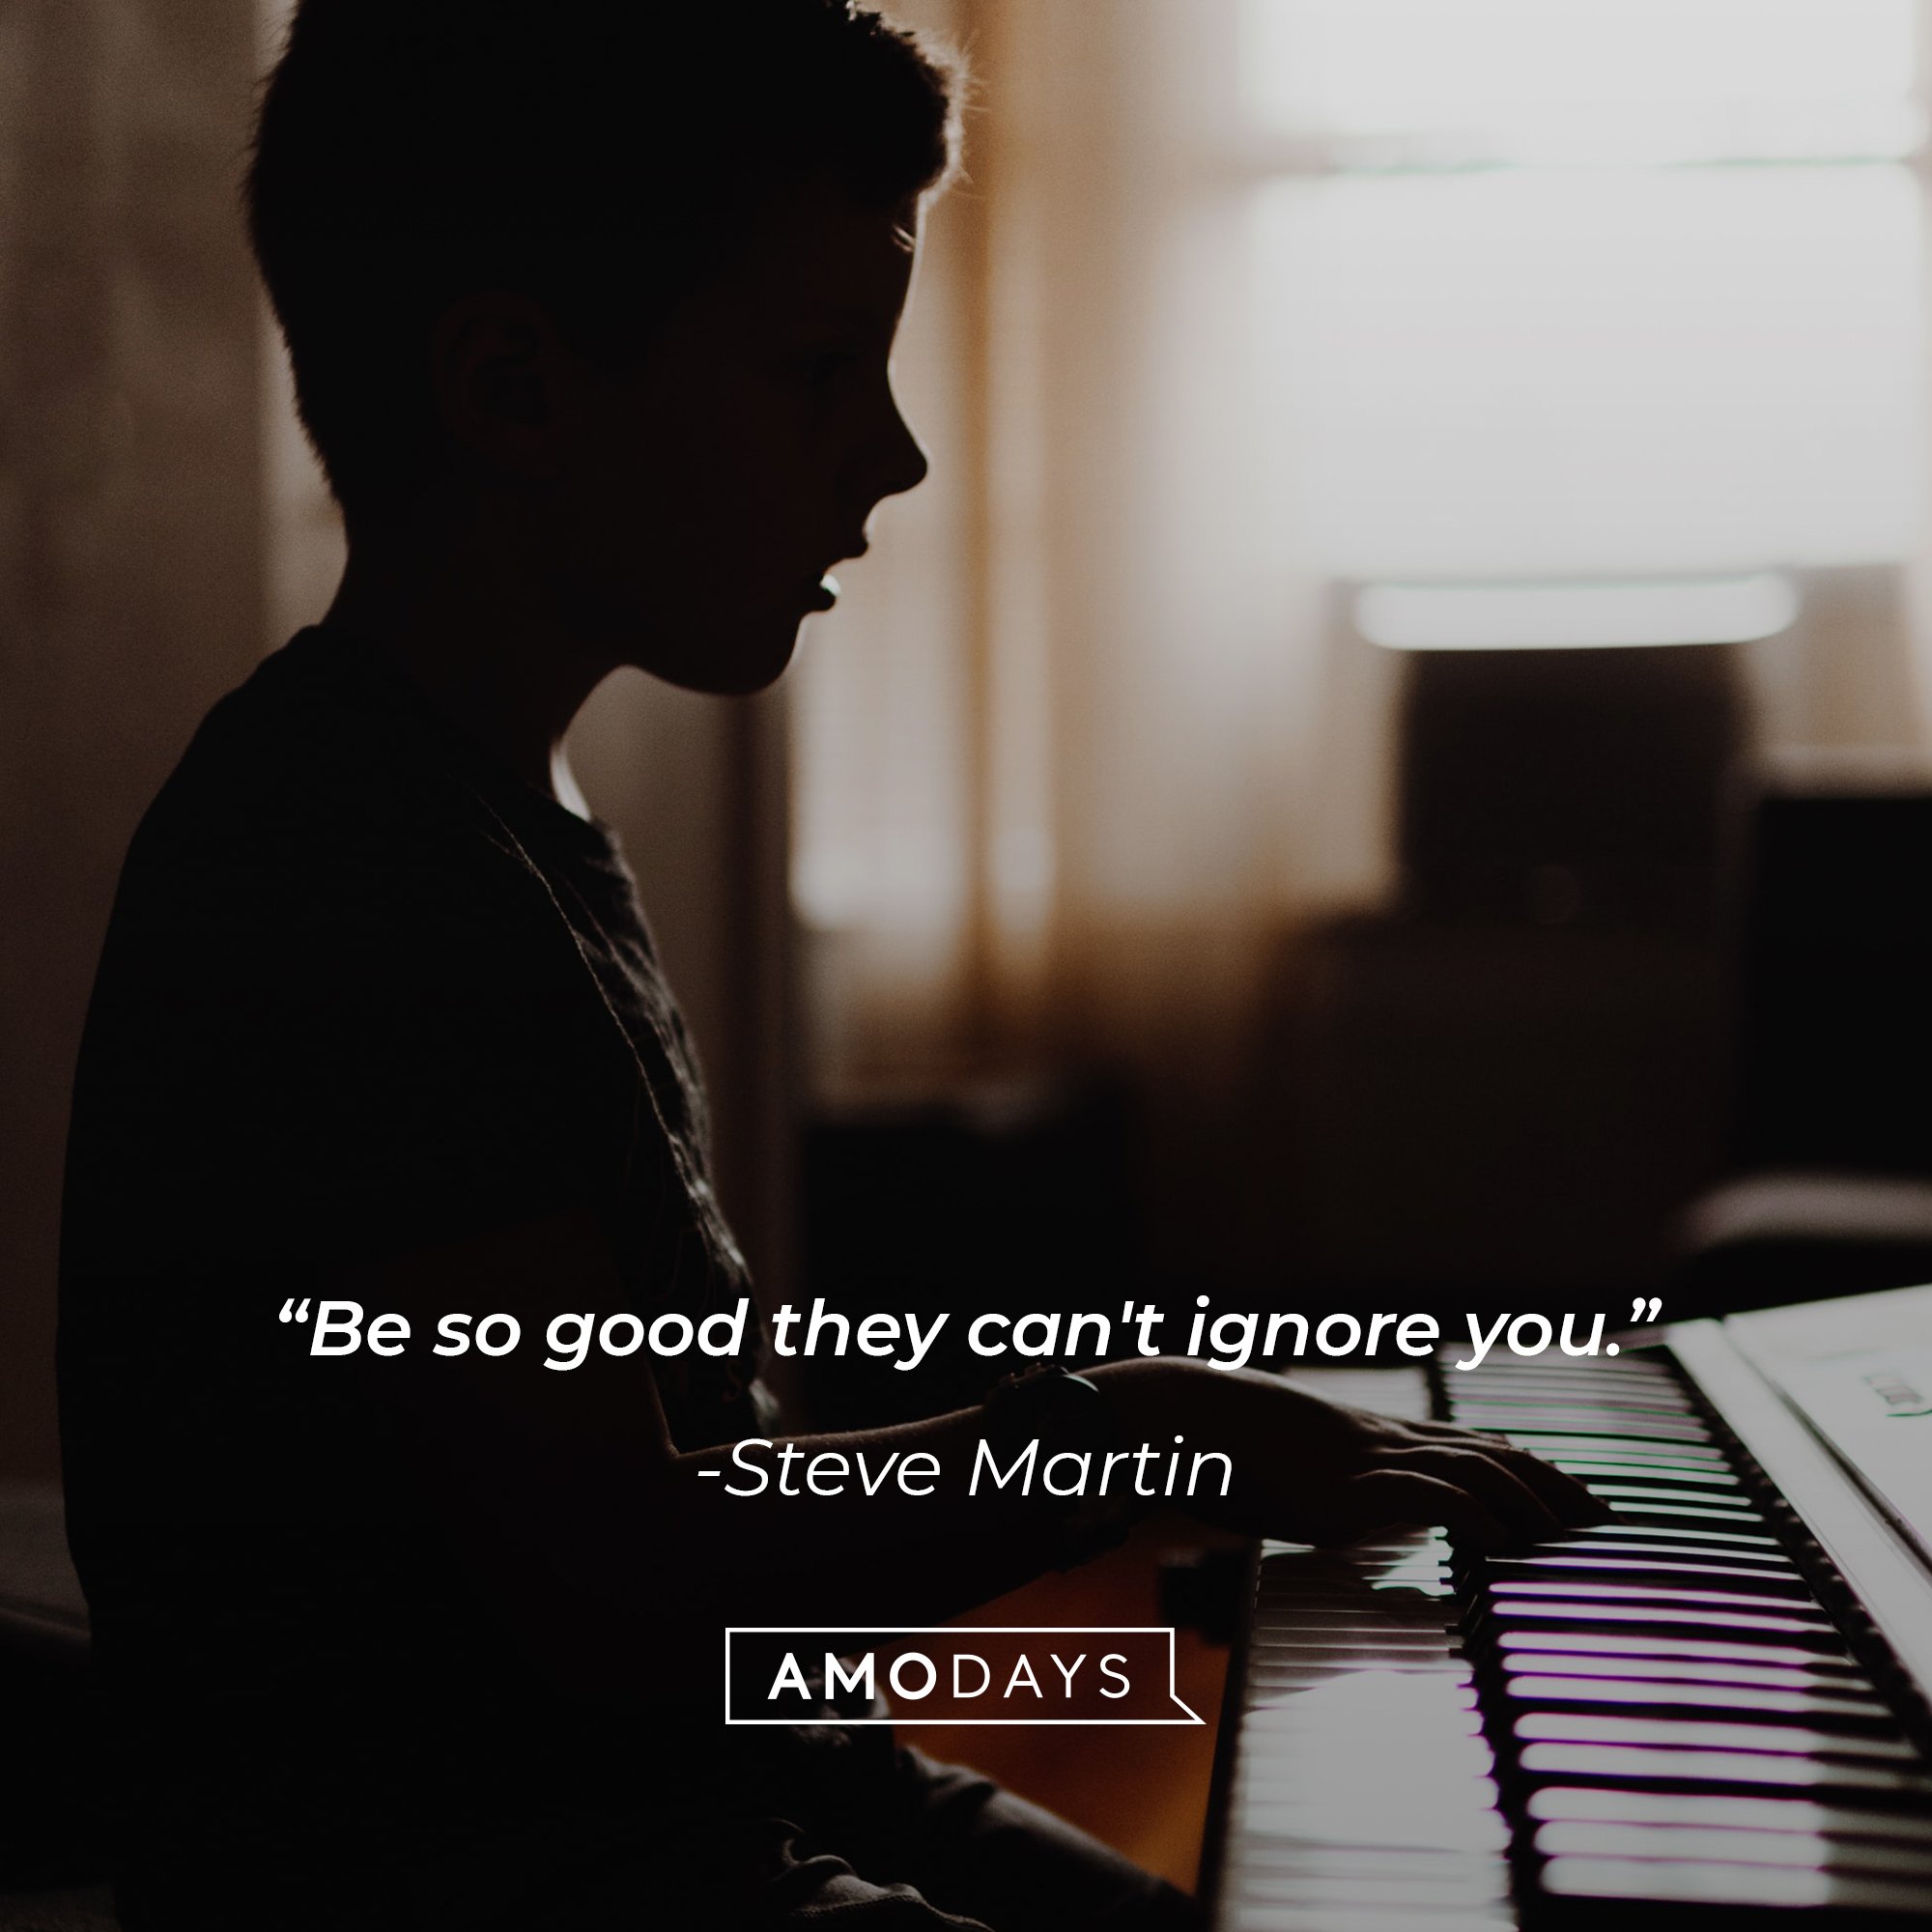 Steve Martin’s quote:“Be so good they can't ignore you.” | Image: Amodays   